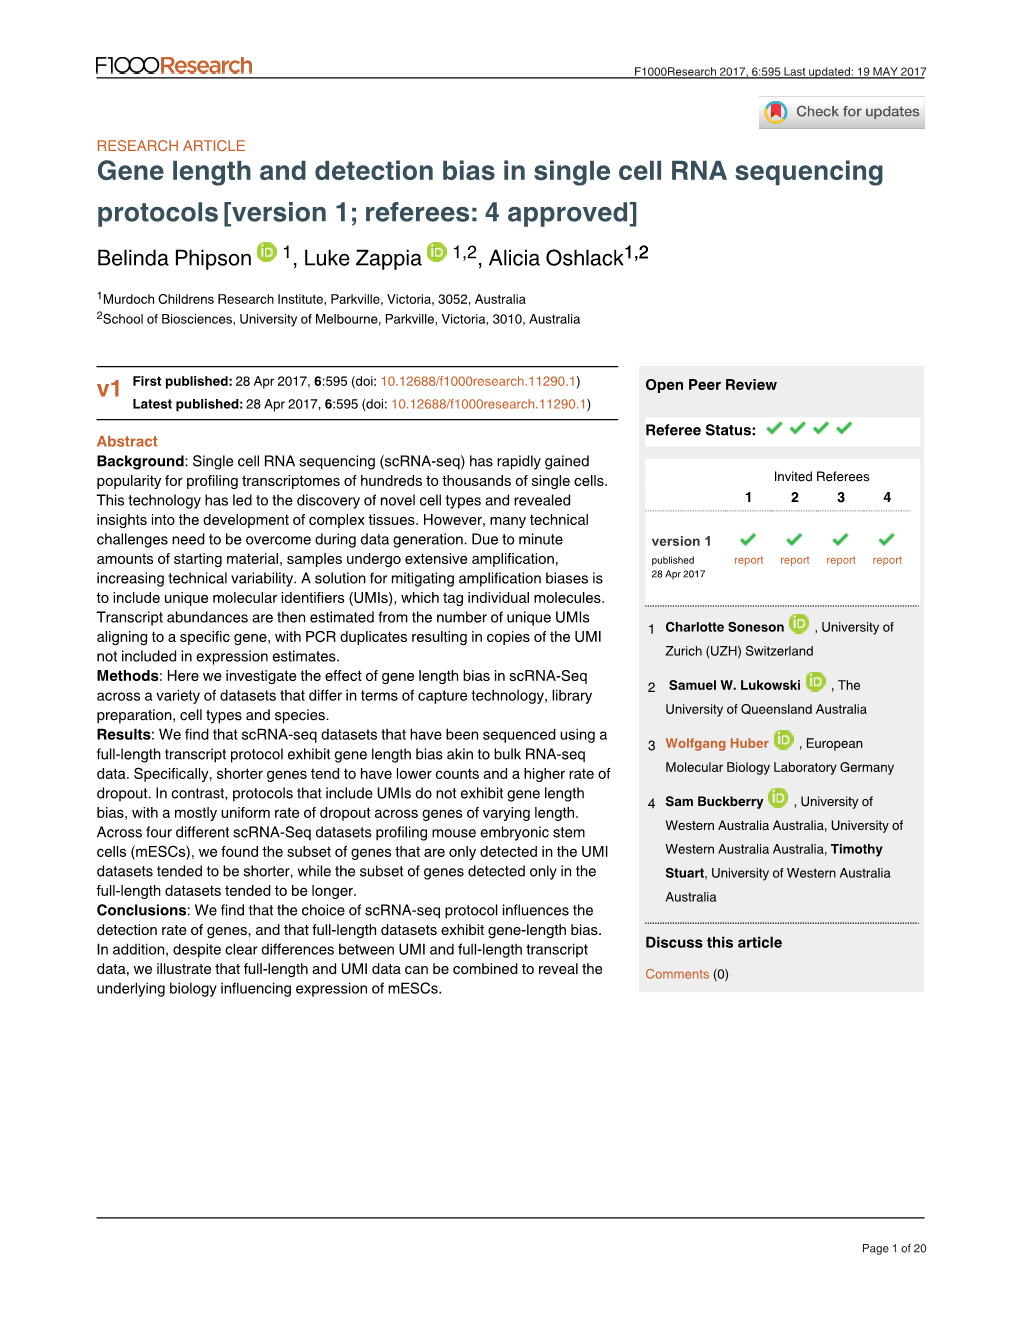 Gene Length and Detection Bias in Single Cell RNA Sequencing Protocols [Version 1; Referees: 4 Approved] Belinda Phipson 1, Luke Zappia 1,2, Alicia Oshlack1,2